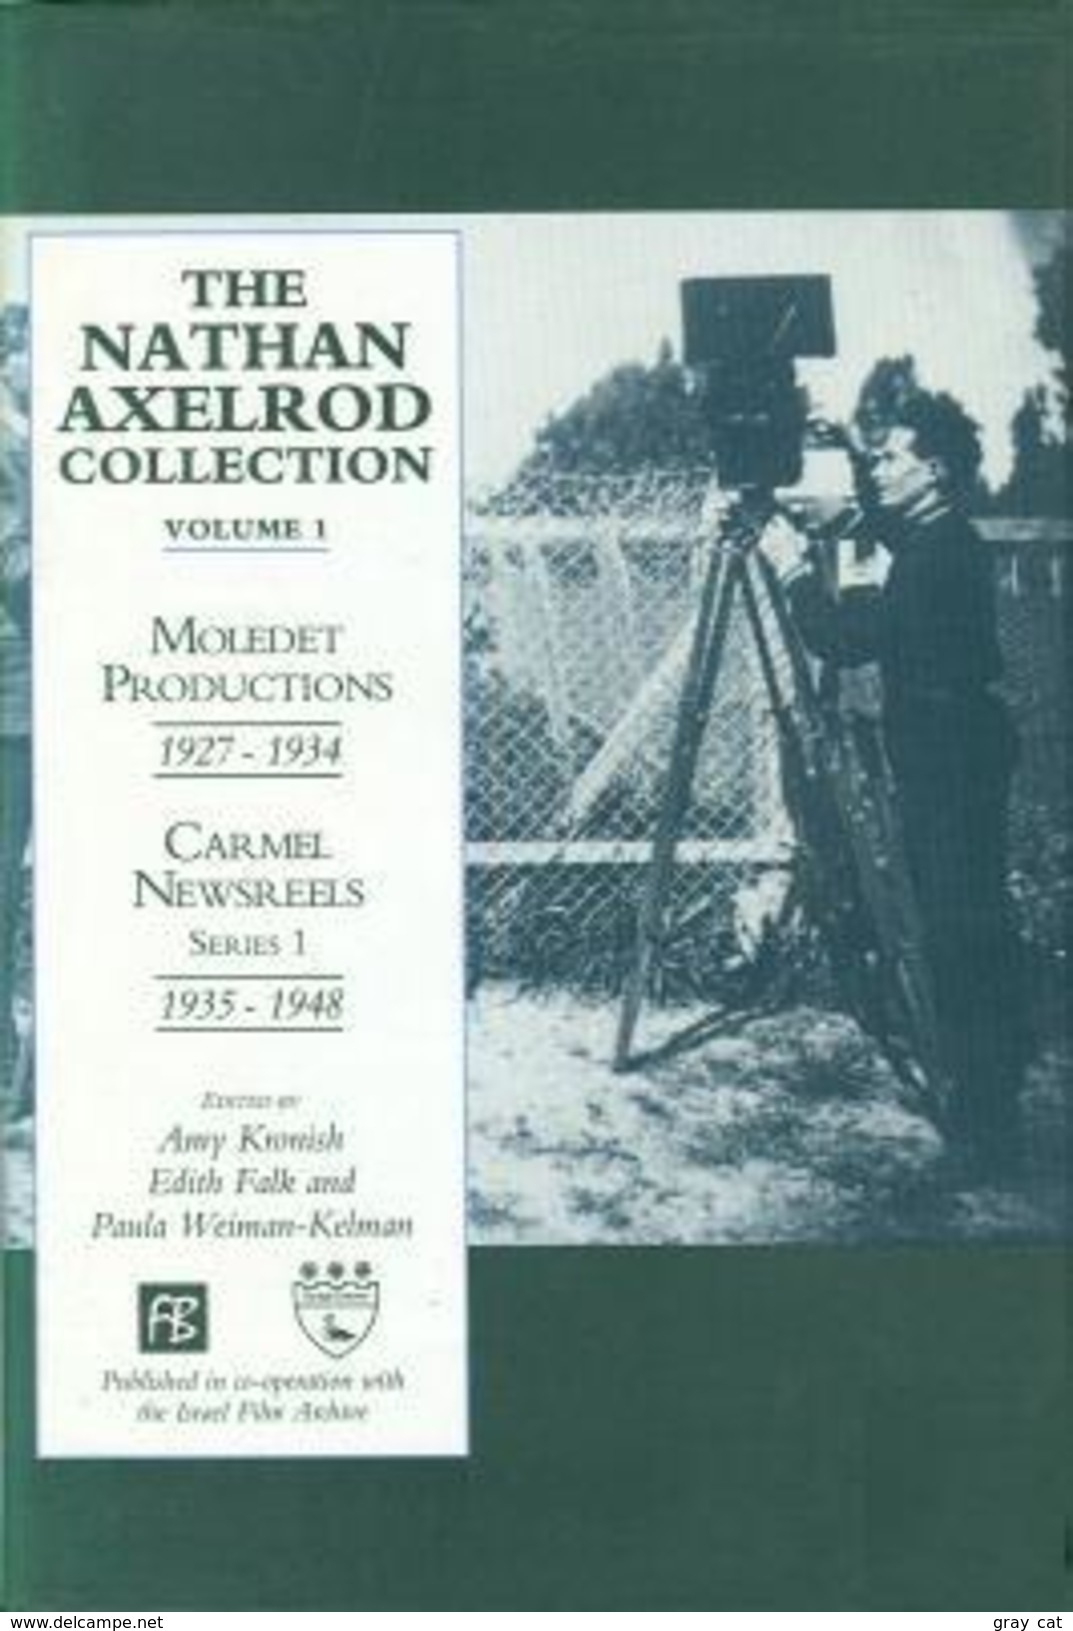 The Nathan Axelrod Collection: Moledet Productions, 1927-34, Carmel Newsreels, Series 1, 1935-48 Volume. 1 By Kronish, A - Photography